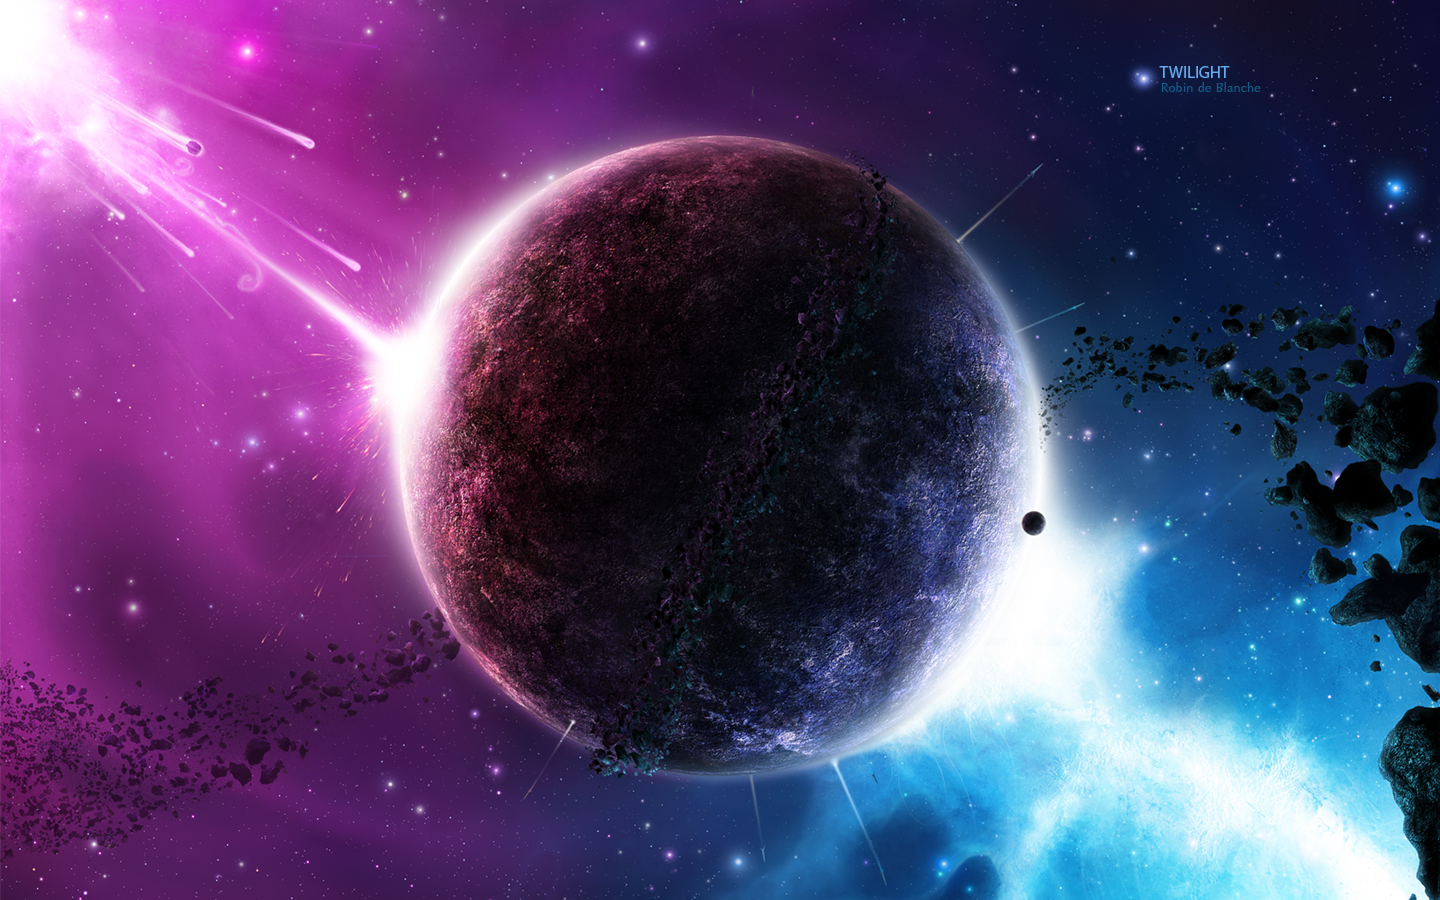 SpaceFantasy Wallpaper Set 6 171 Awesome Wallpapers